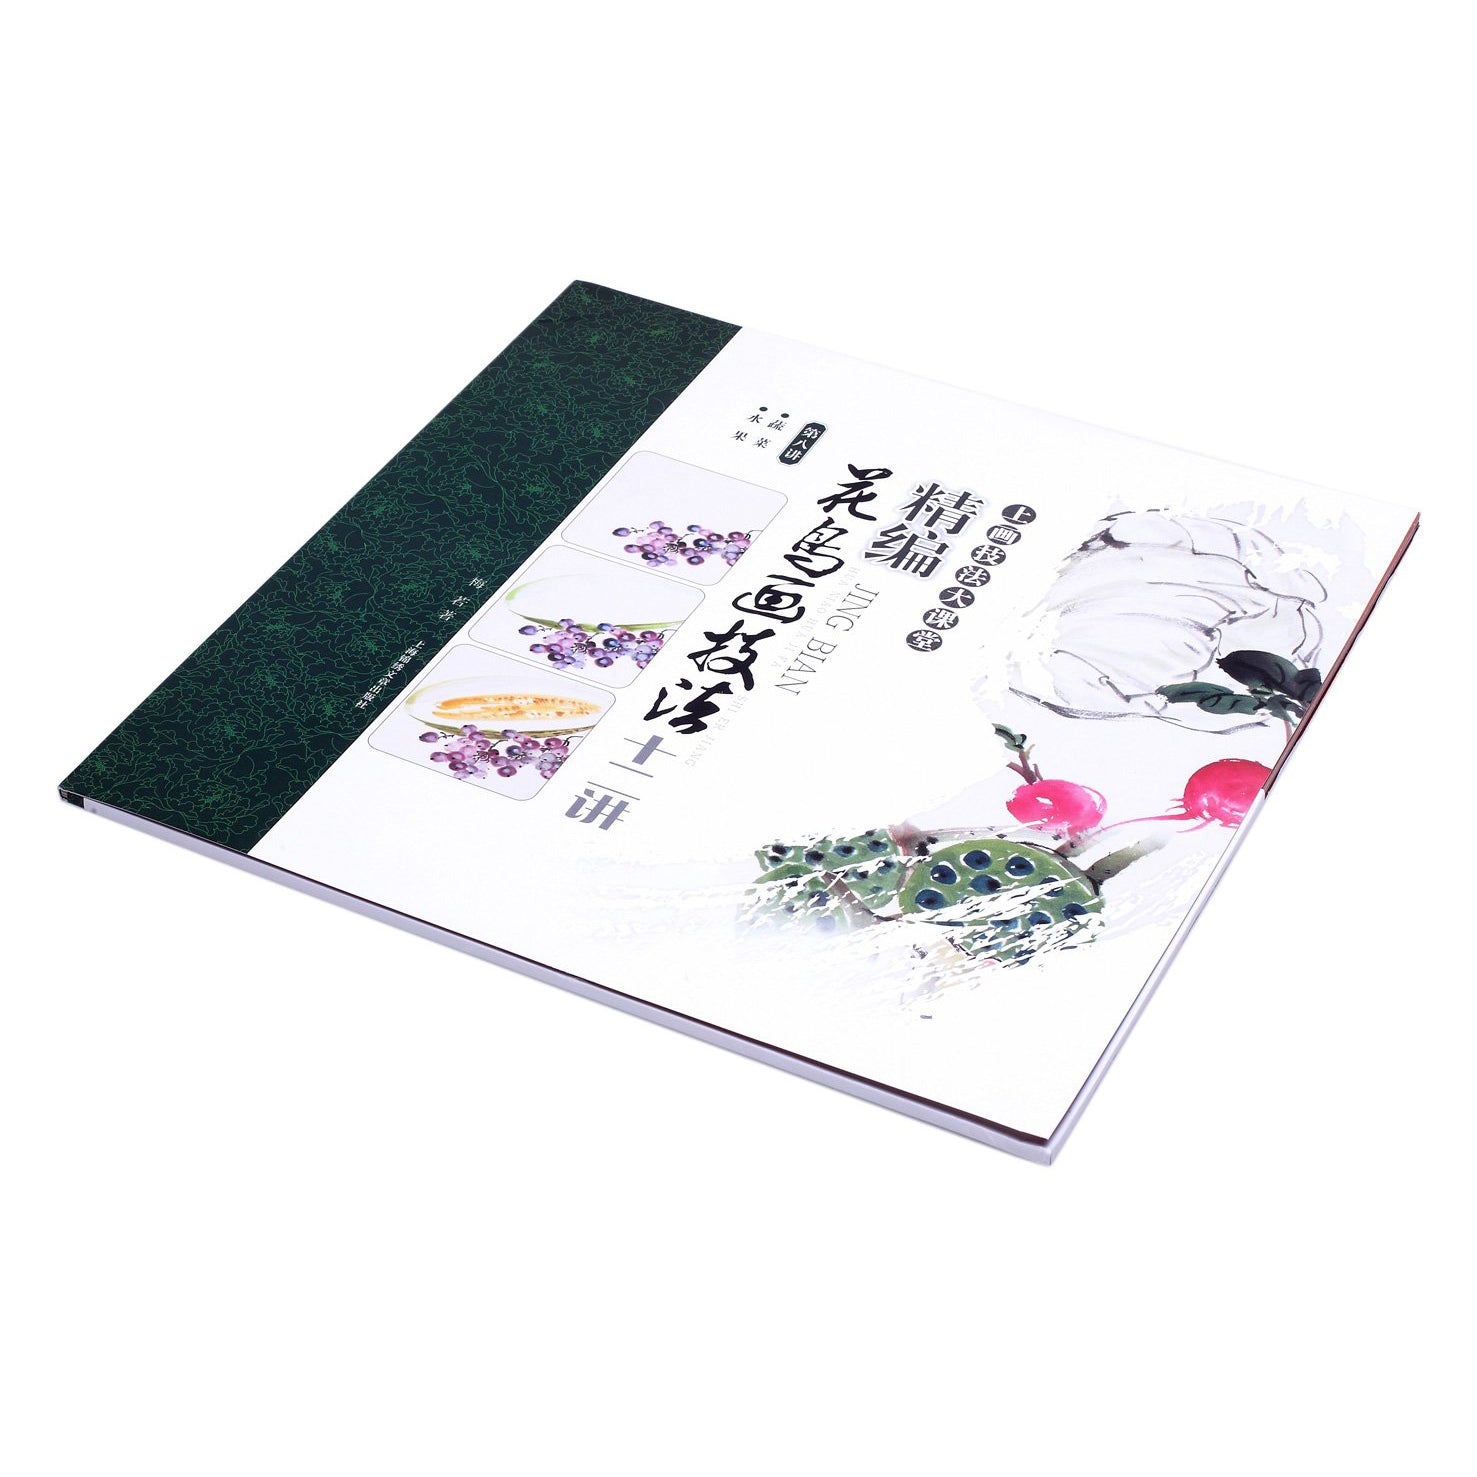 This edition of the easy to use May™s Painting Card series focuses on painting vegetables in Chinese and Japanese brush painting